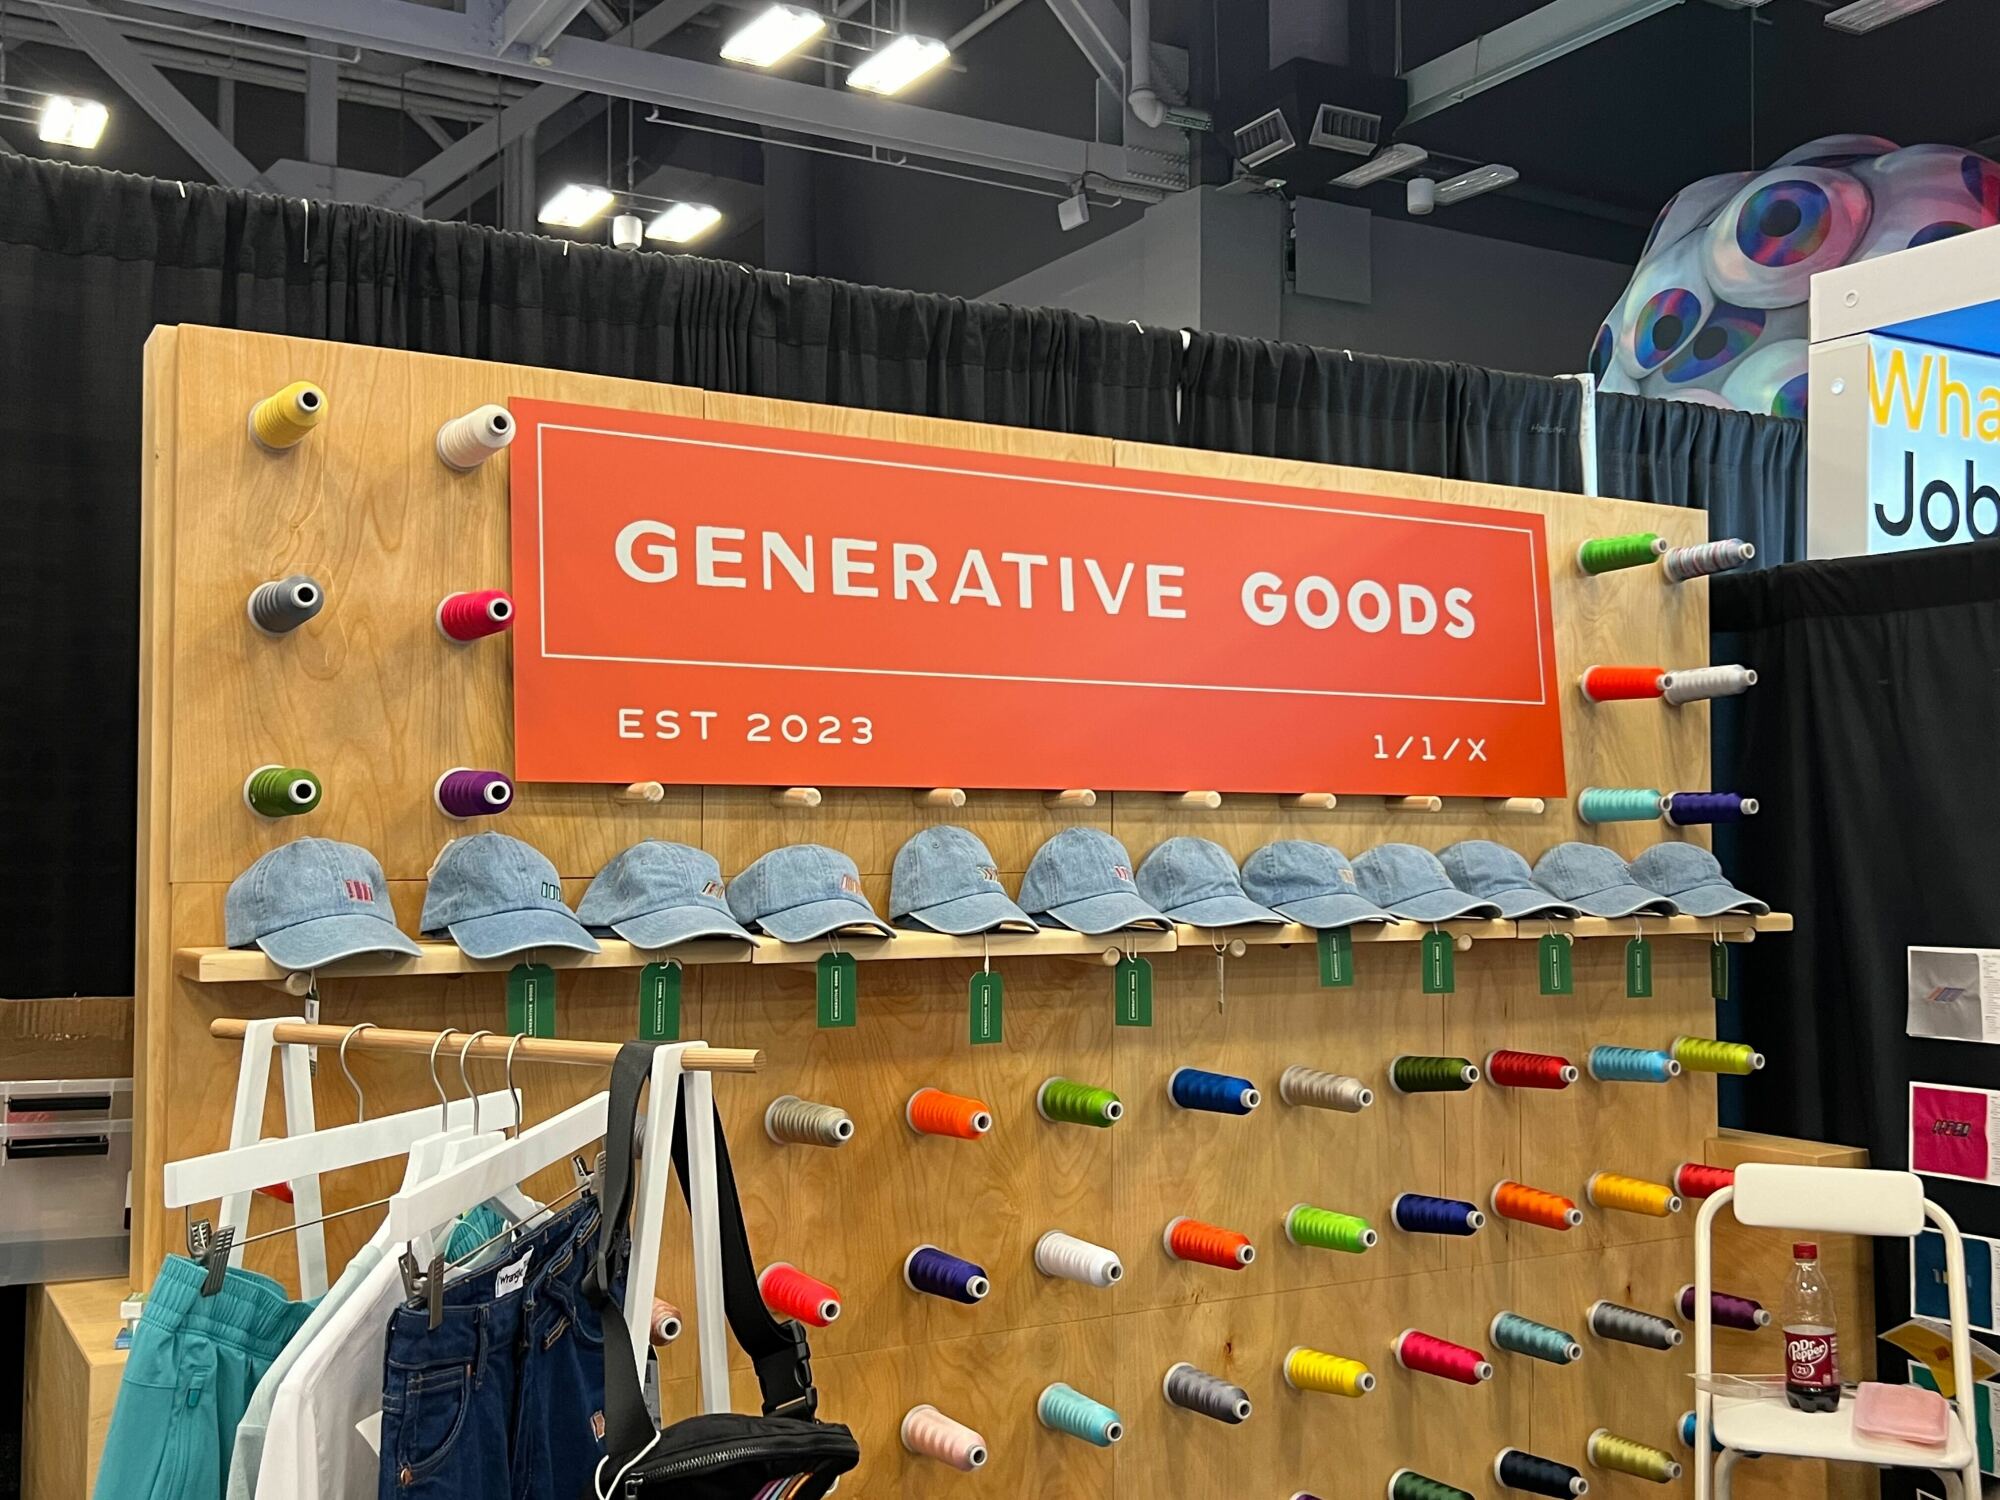 a display of hats and yarn across a wooden board with a orange sign that says "generative goods"